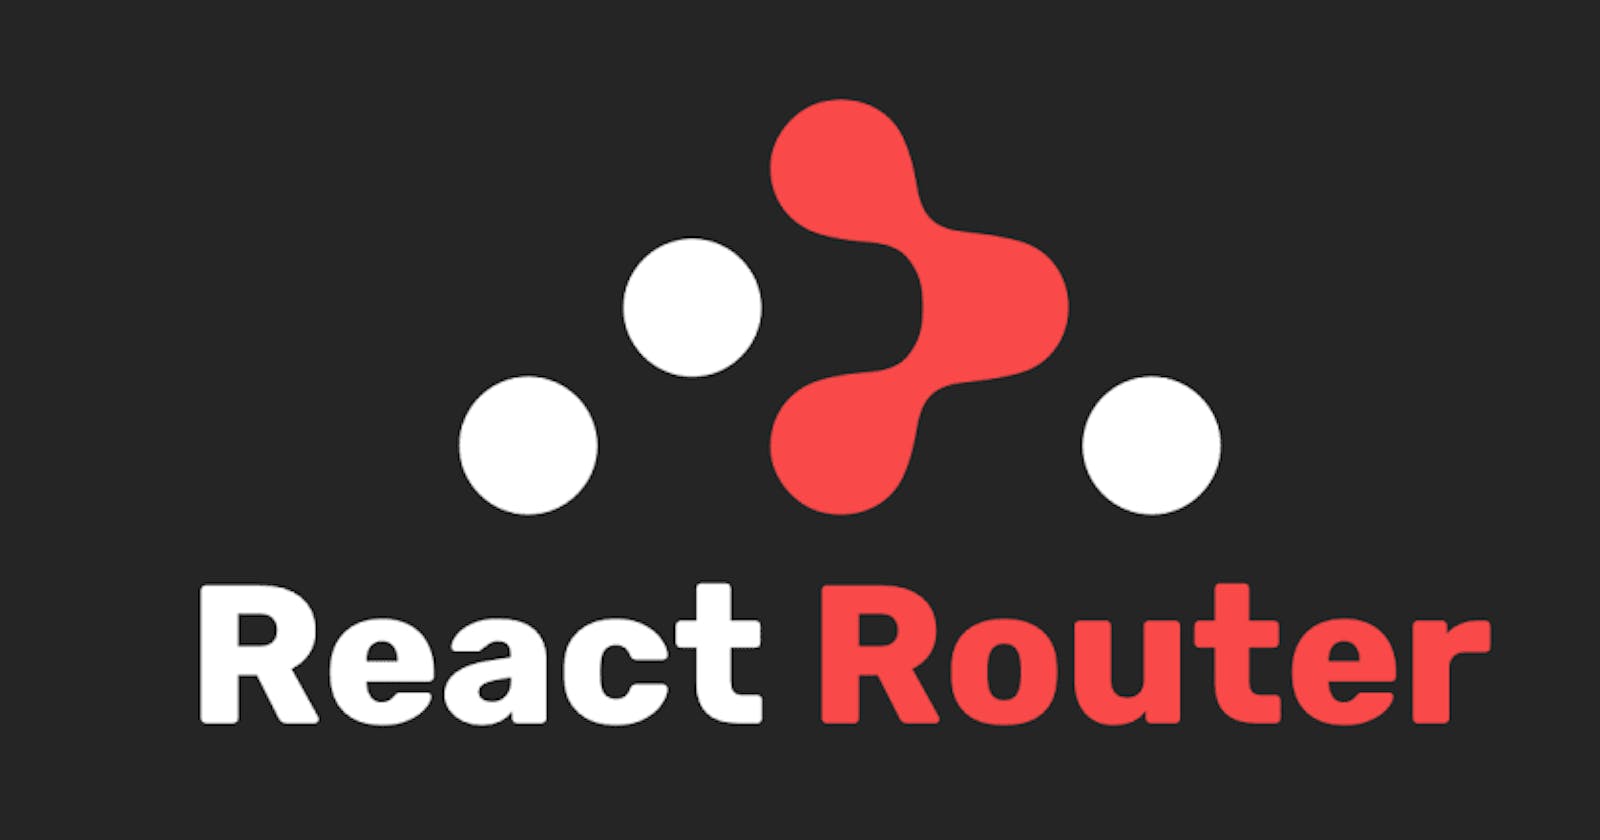 Beginner's guide to React Router